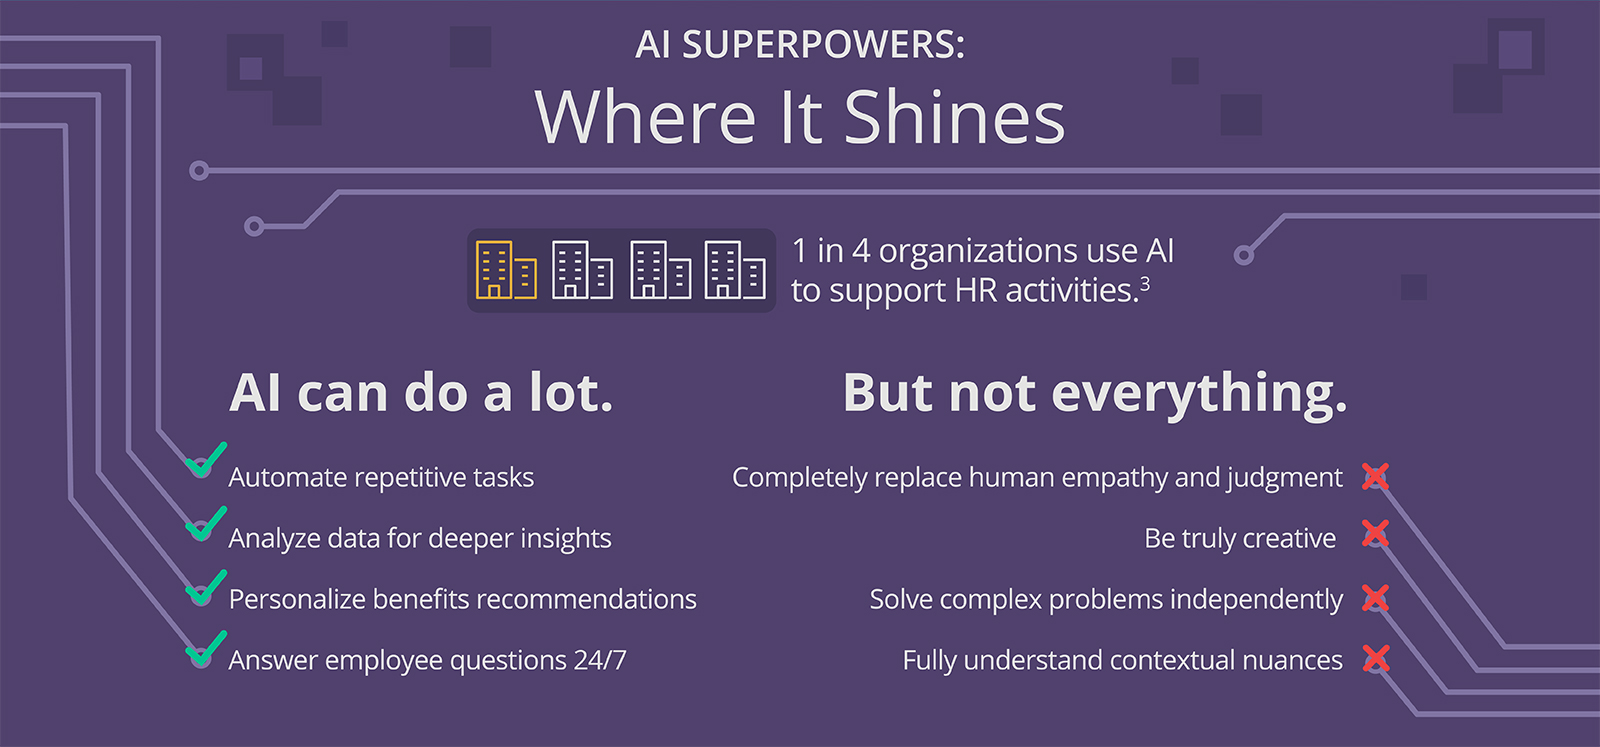 AI Superpowers: Where It Shines 1 in 4 organizations use AI to support HR activities. AI can do a lot. Automate repetitive tasks Analyze data for deeper insights Personalize benefits recommendations Answer employee questions 24/7 But not everything. Completely replace human empathy and judgment Be truly creative Solve complex problems independently Fully understand contextual nuances 